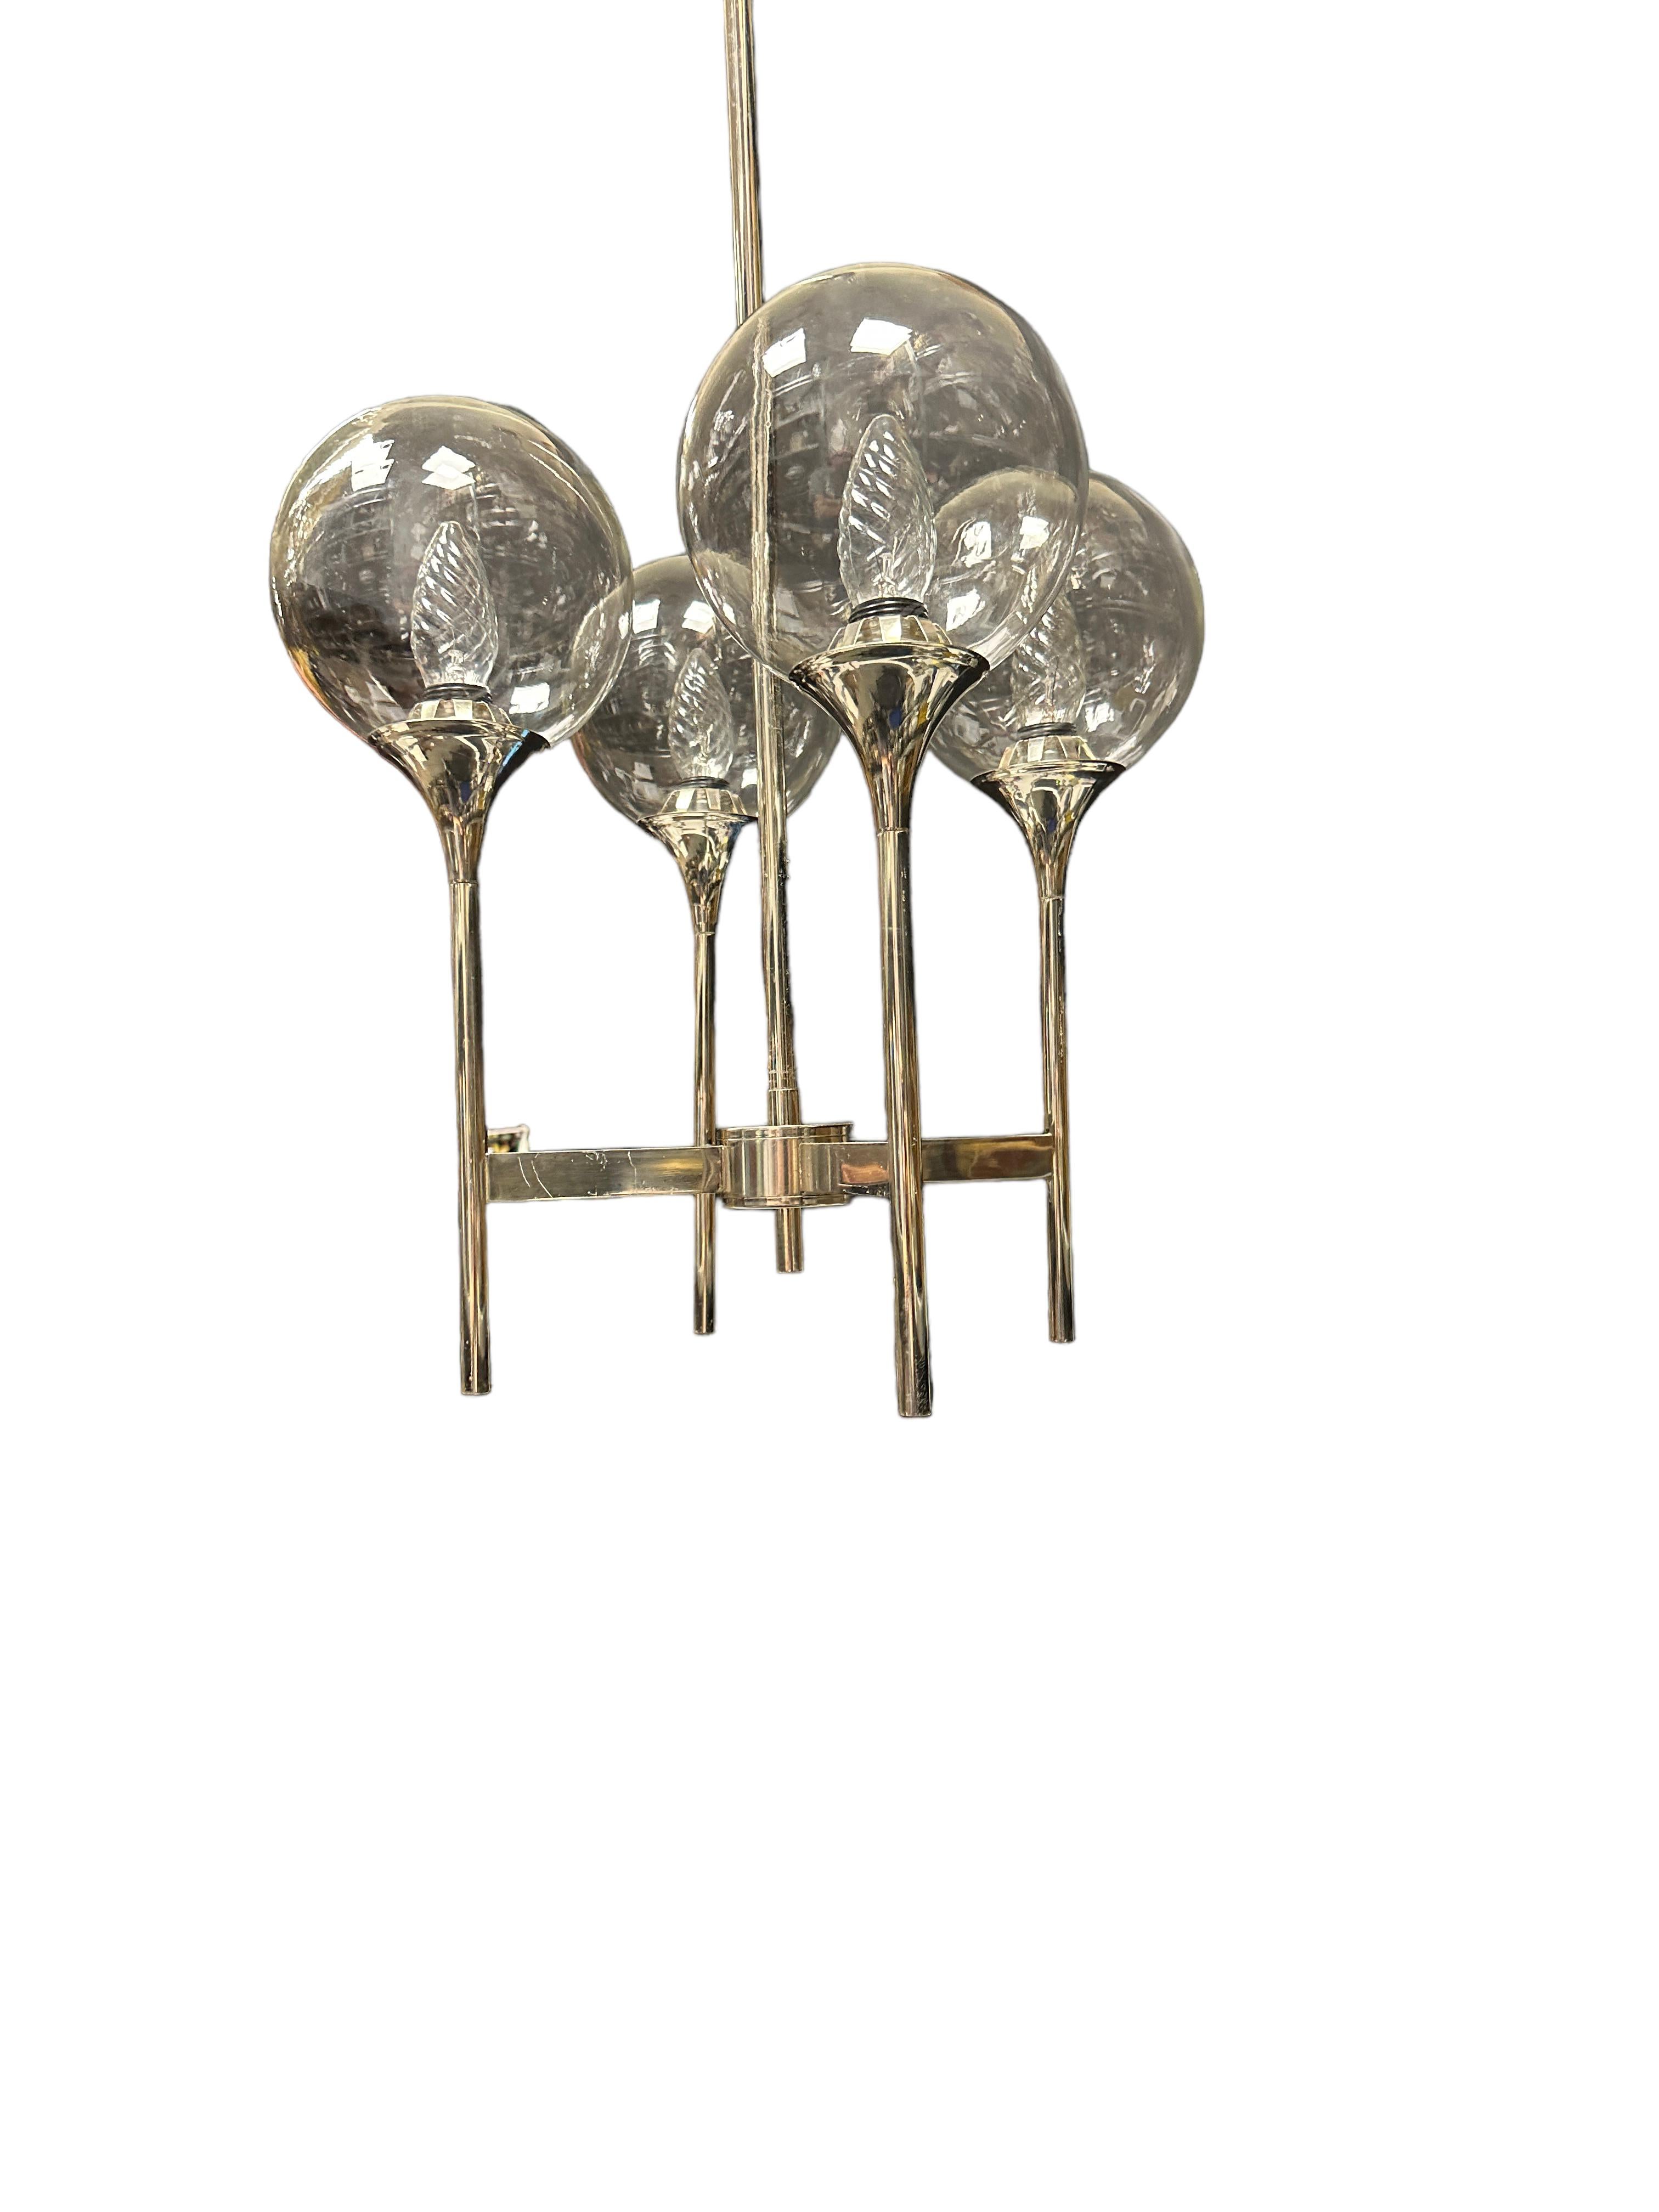 Pair of Reggiani Sciolari Style 1970S 4 Light, Chrome and Glass Ball Chandelier For Sale 3